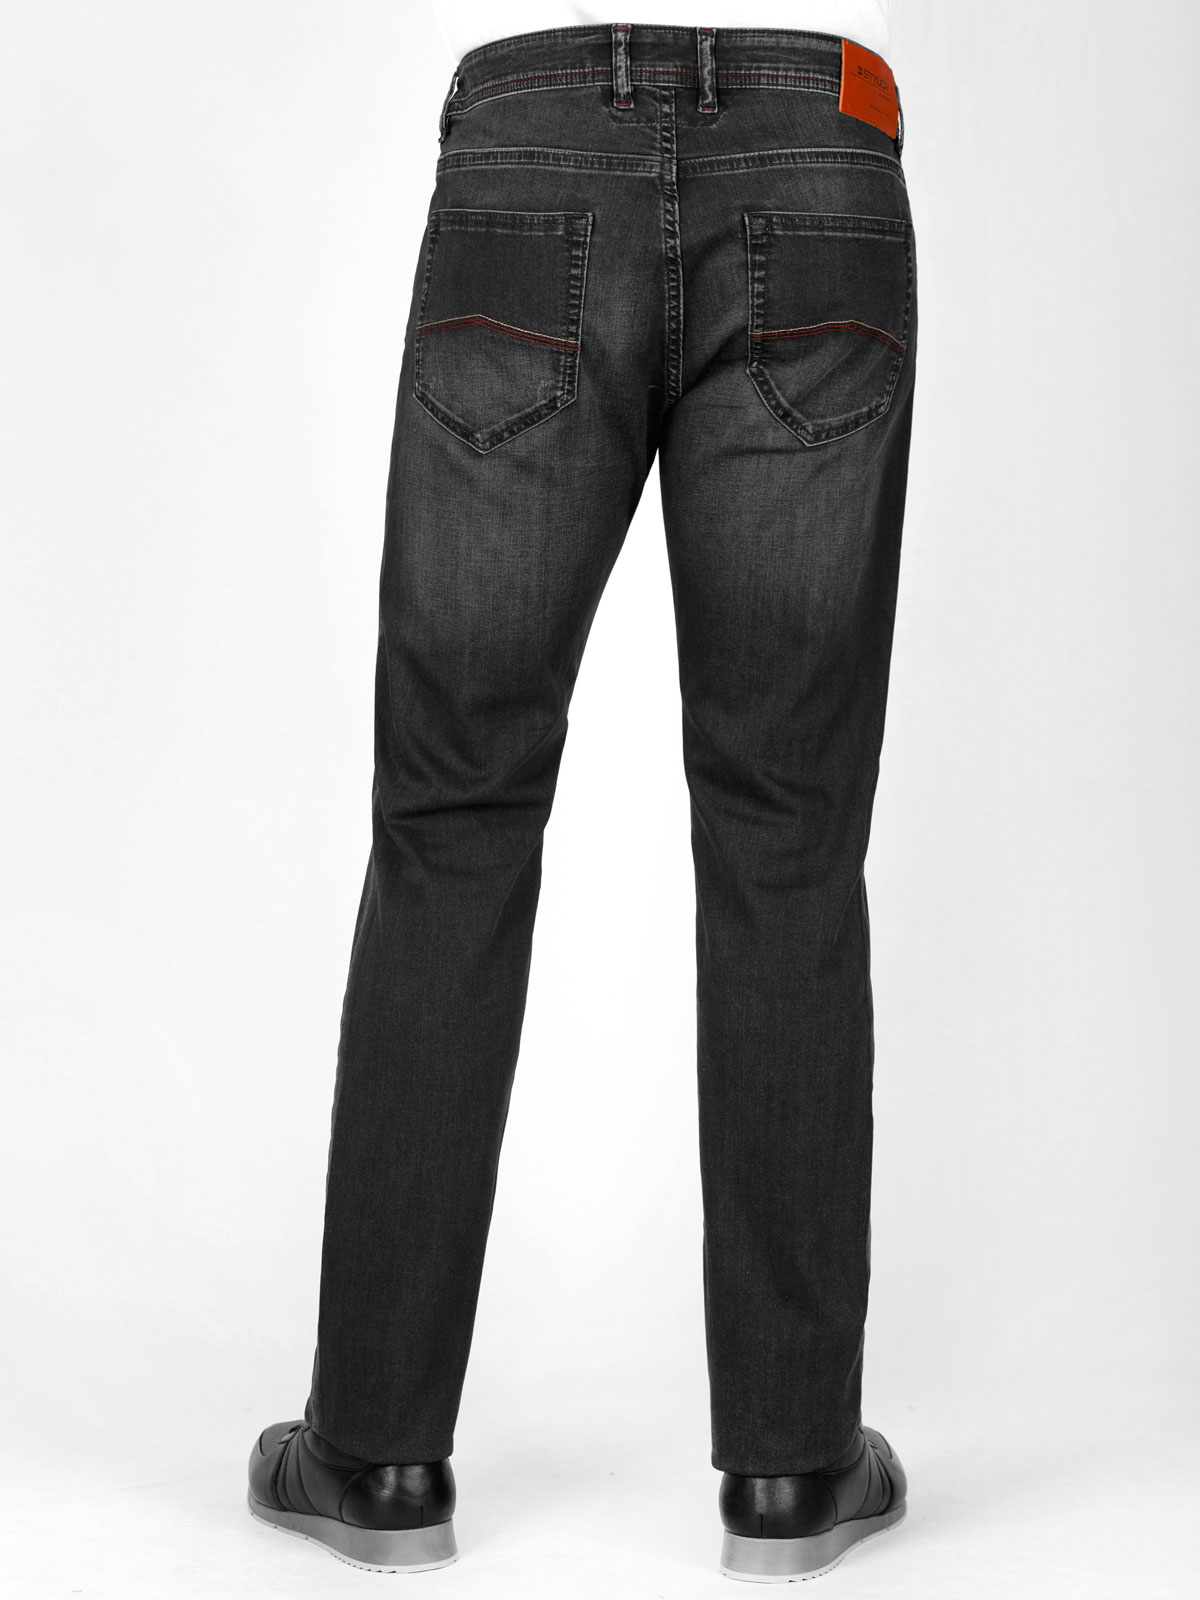 Black jeans with a fitted silhouette - 62166 € 78.18 img3